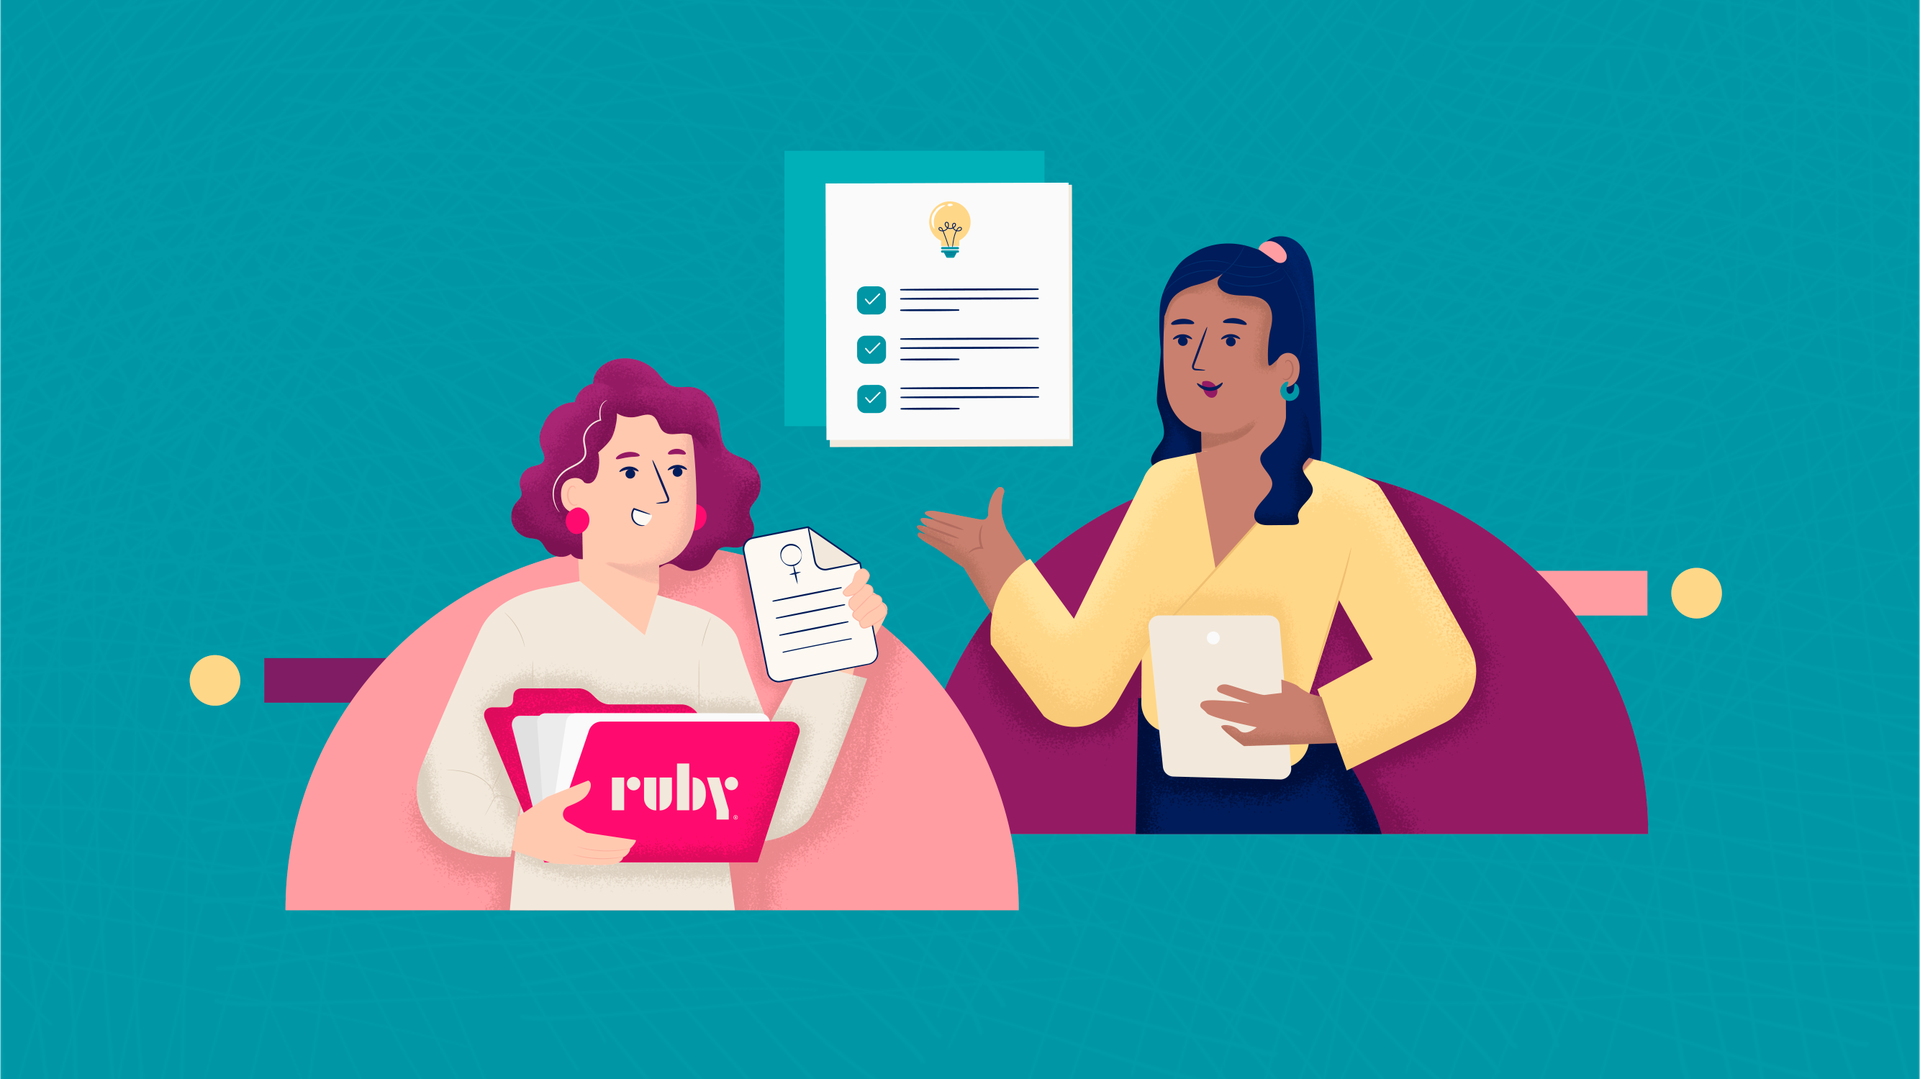 14 resources for women business owners: illustration of women business owners holding documents and discussing a checklist